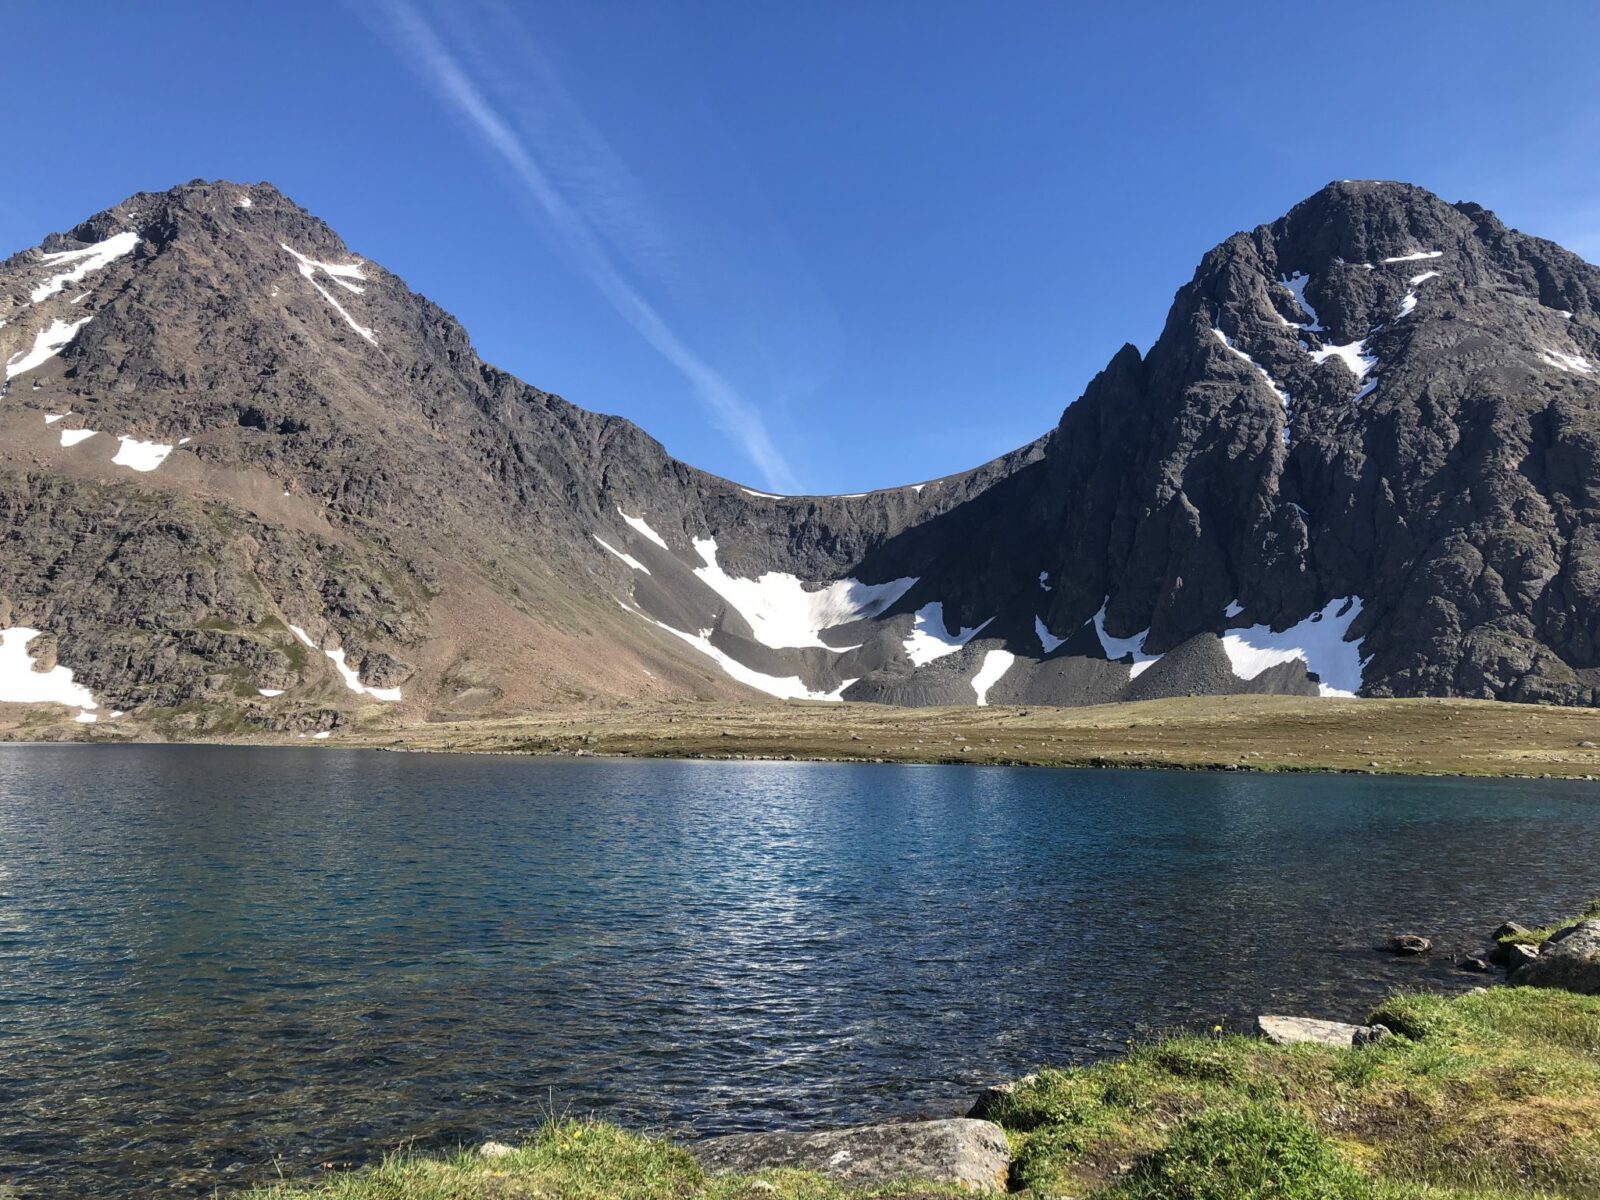 Rabbit Lake near Anchorage is an alpine lake surrounded by rocky mountains with bits of snow clinging all summer